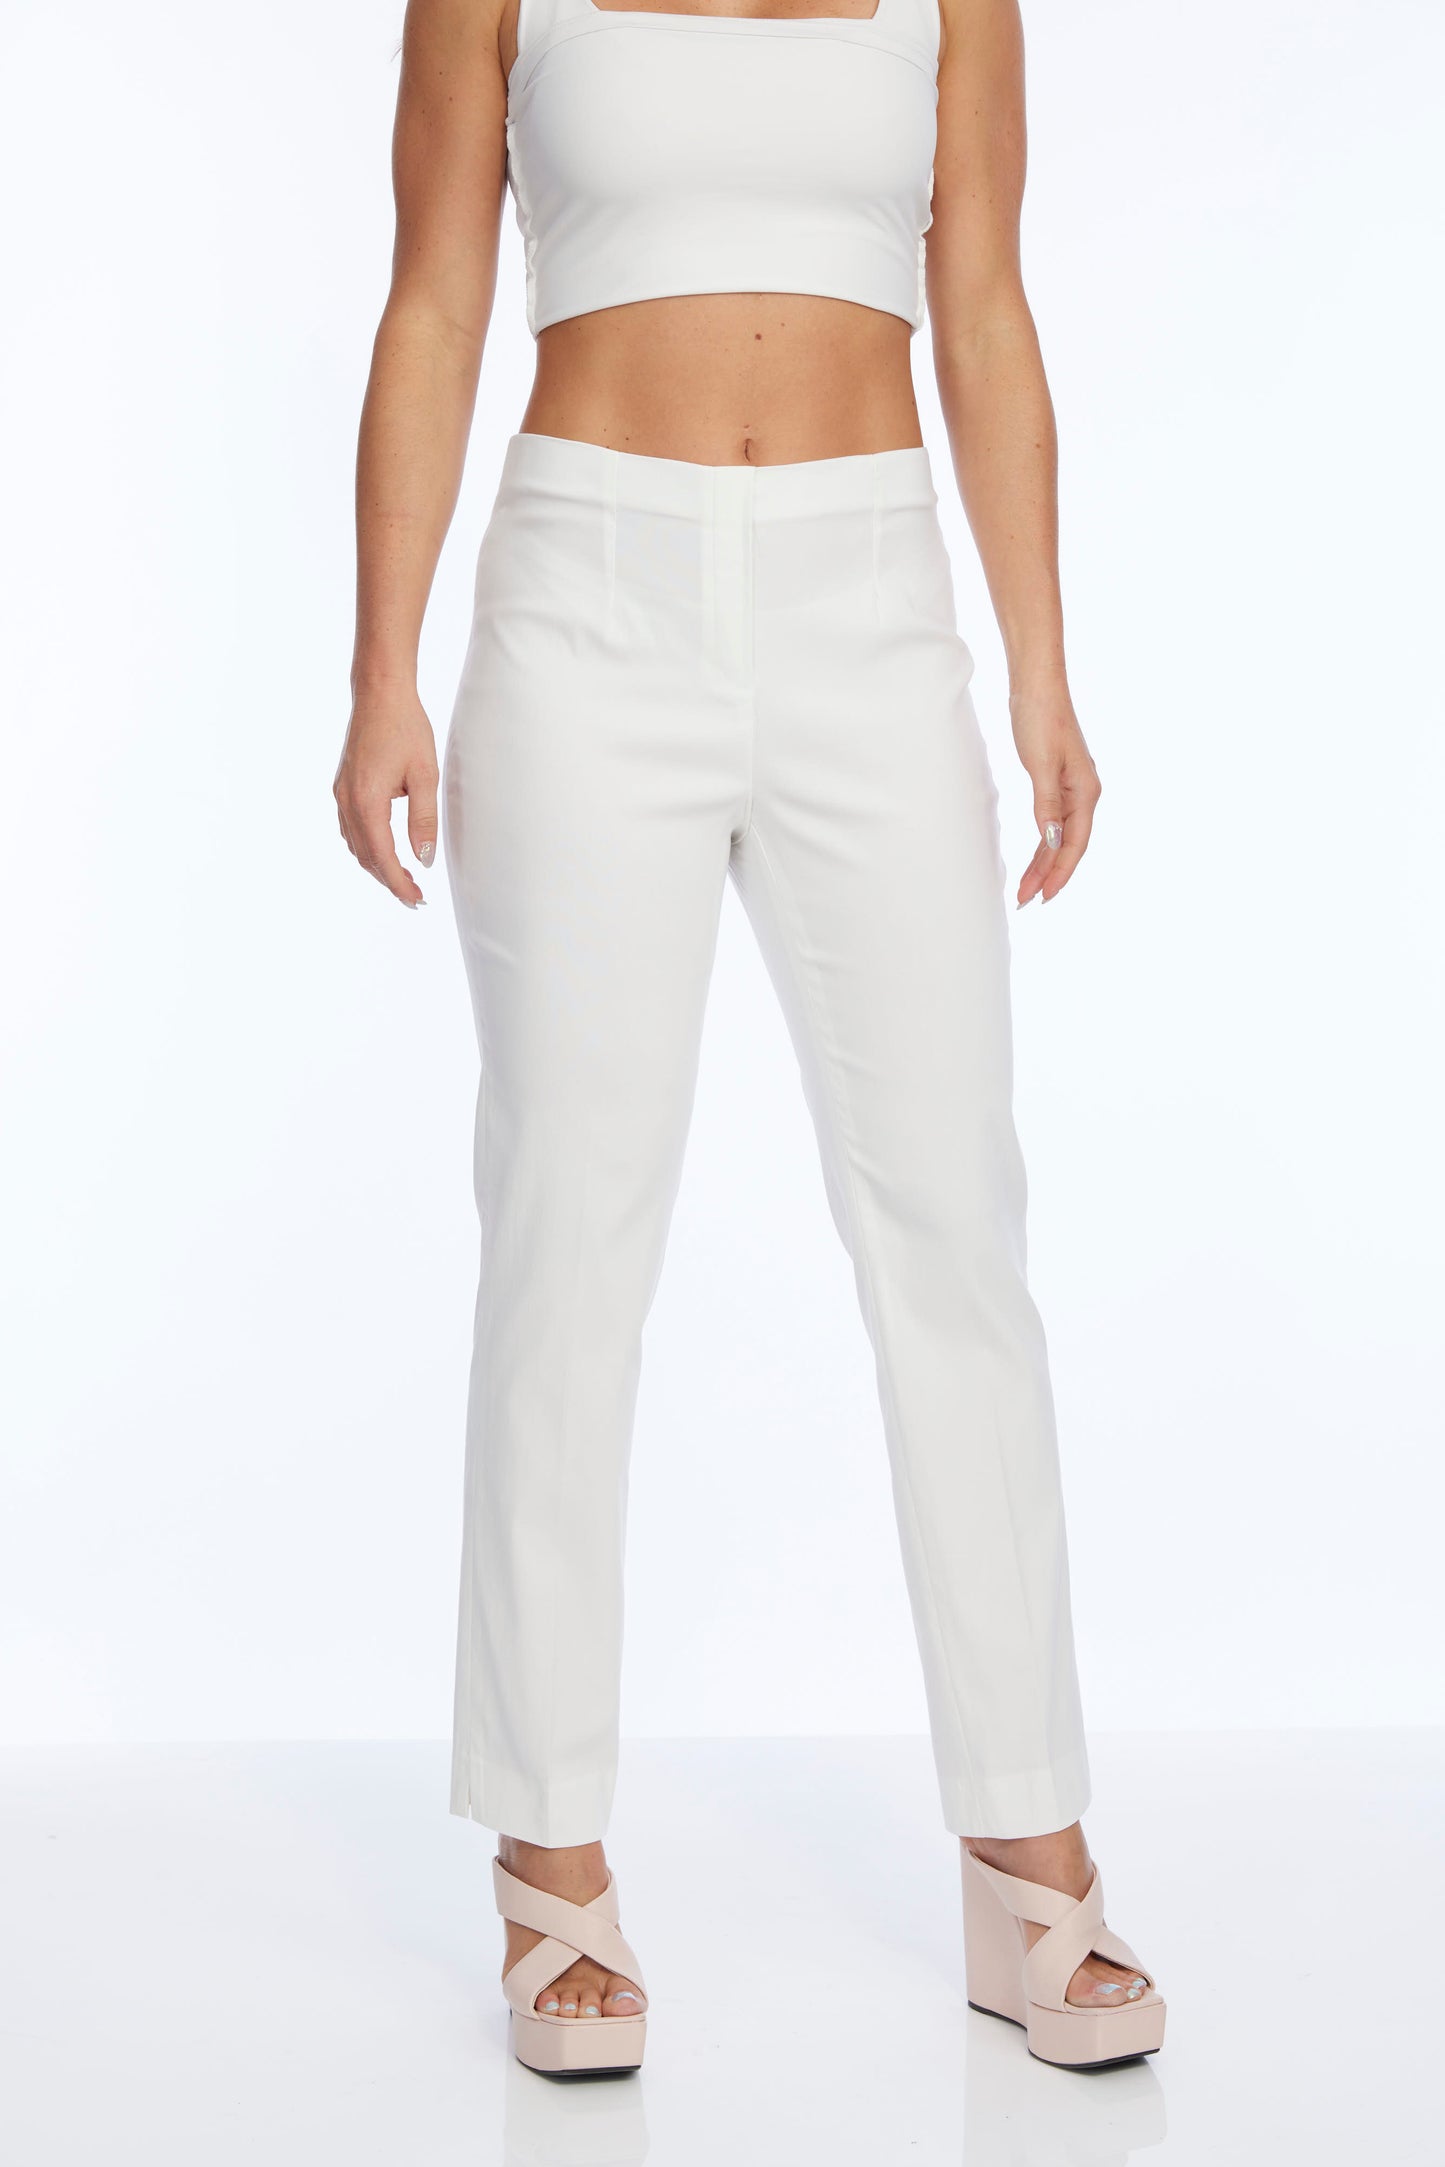 LIOR Women's Made In France Classic Straight Leg Pant-"Lize"